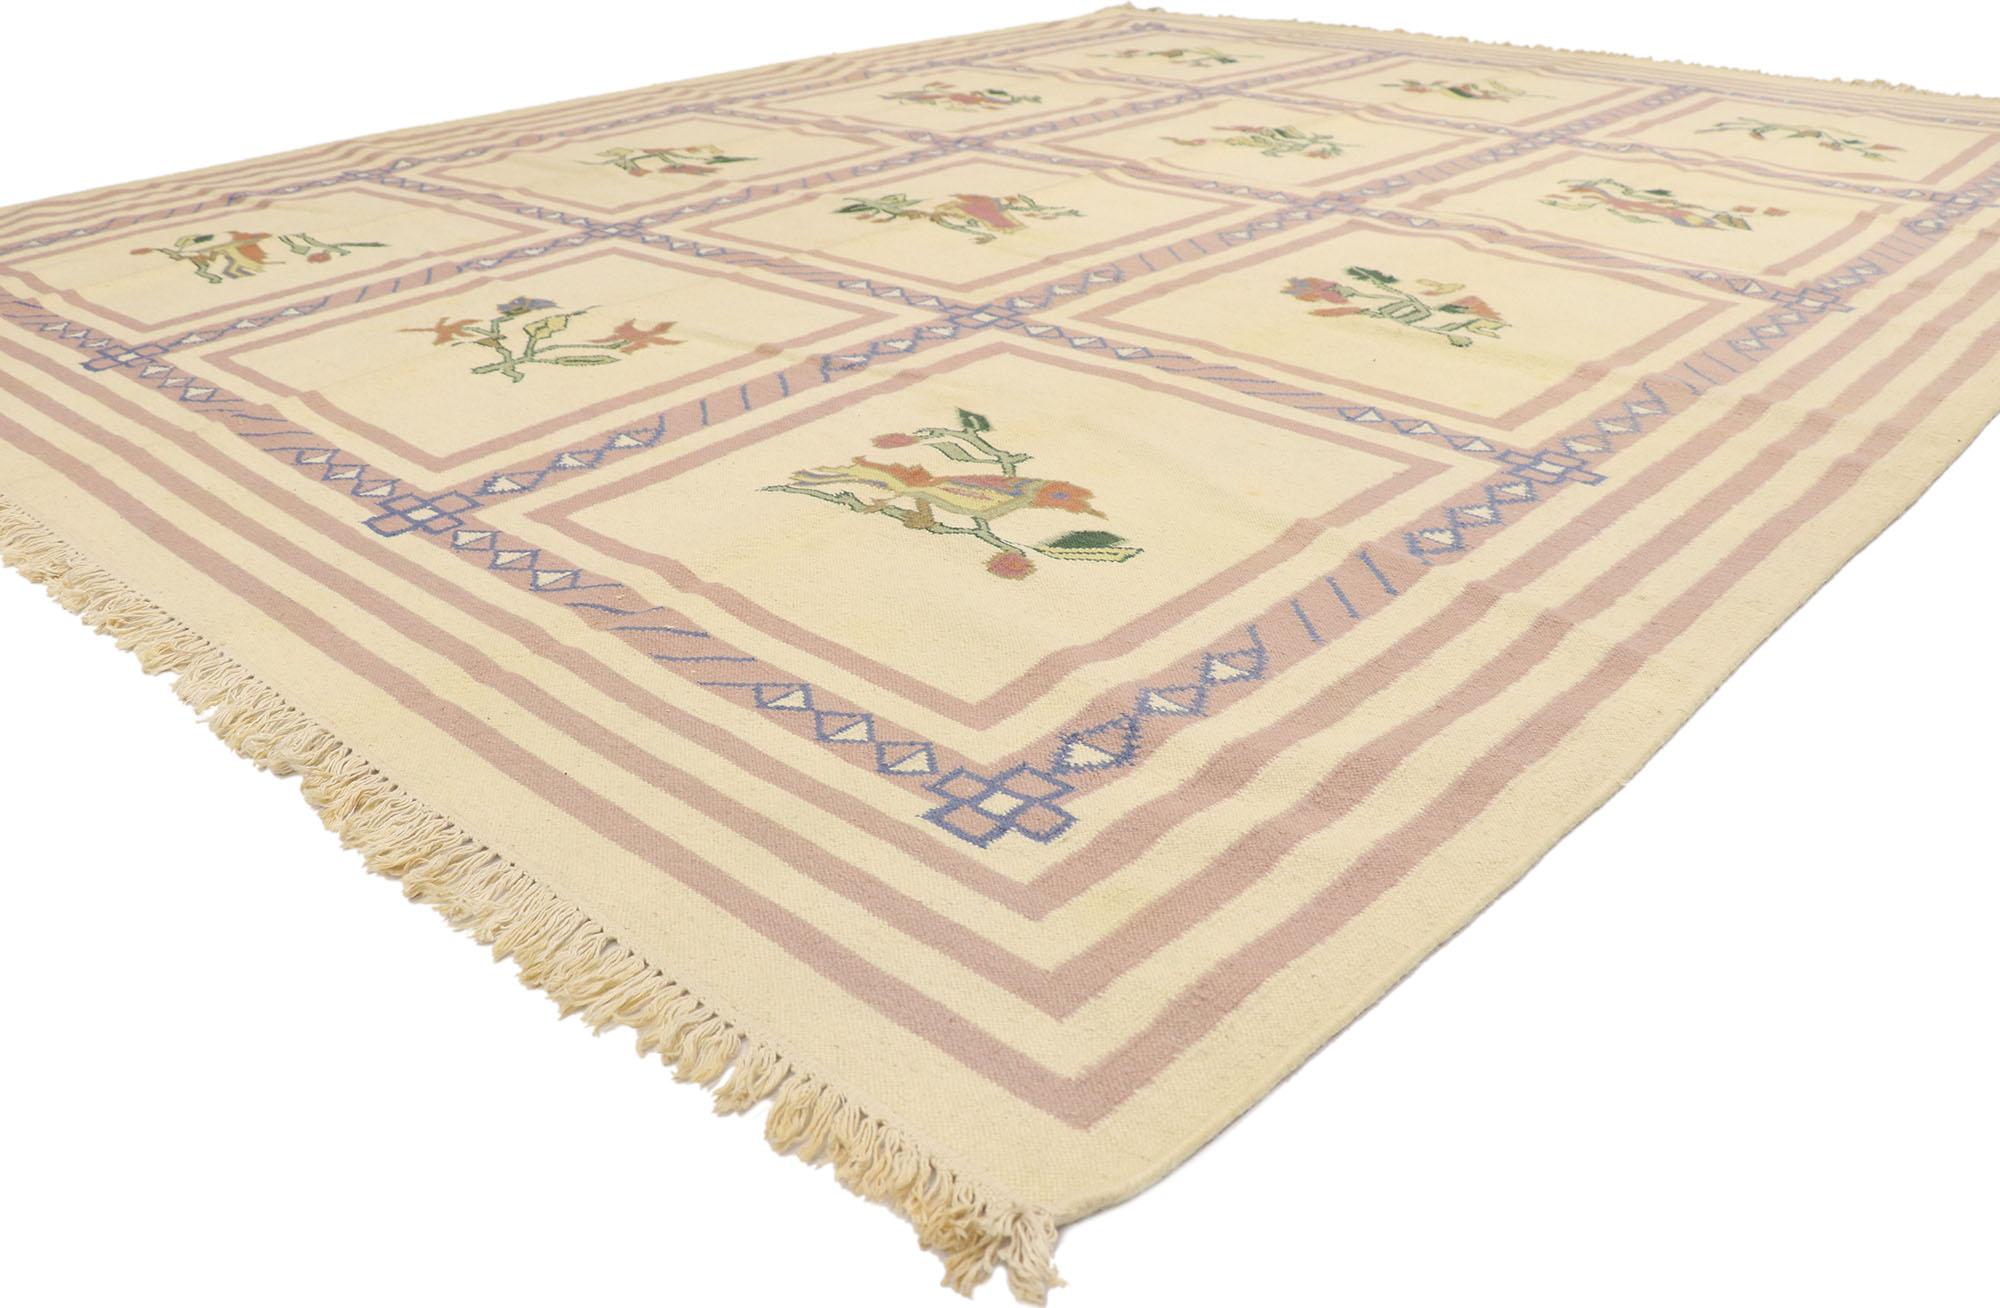 77938 Vintage Romanian Floral Kilim rug 09'03 x 11'08. With its effortless beauty and timeless style, this hand-woven wool vintage Romanian floral kilim rug is a captivating vision of woven beauty. The abrashed beige field beautifully displays a